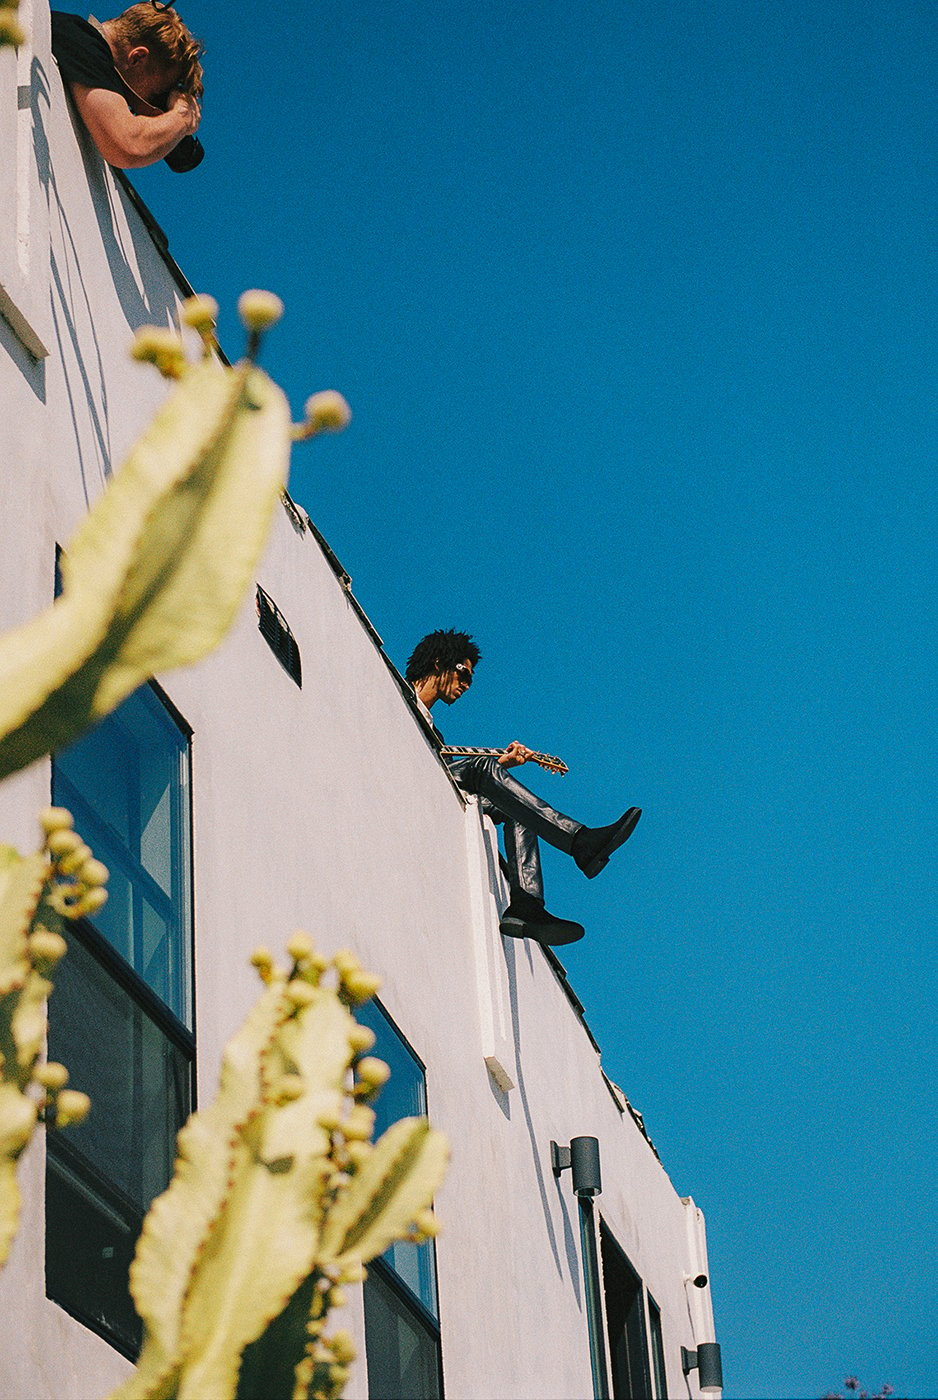 Model Jaxon Rose playing guitar on roof shot from below by Michael Julius for New Republic